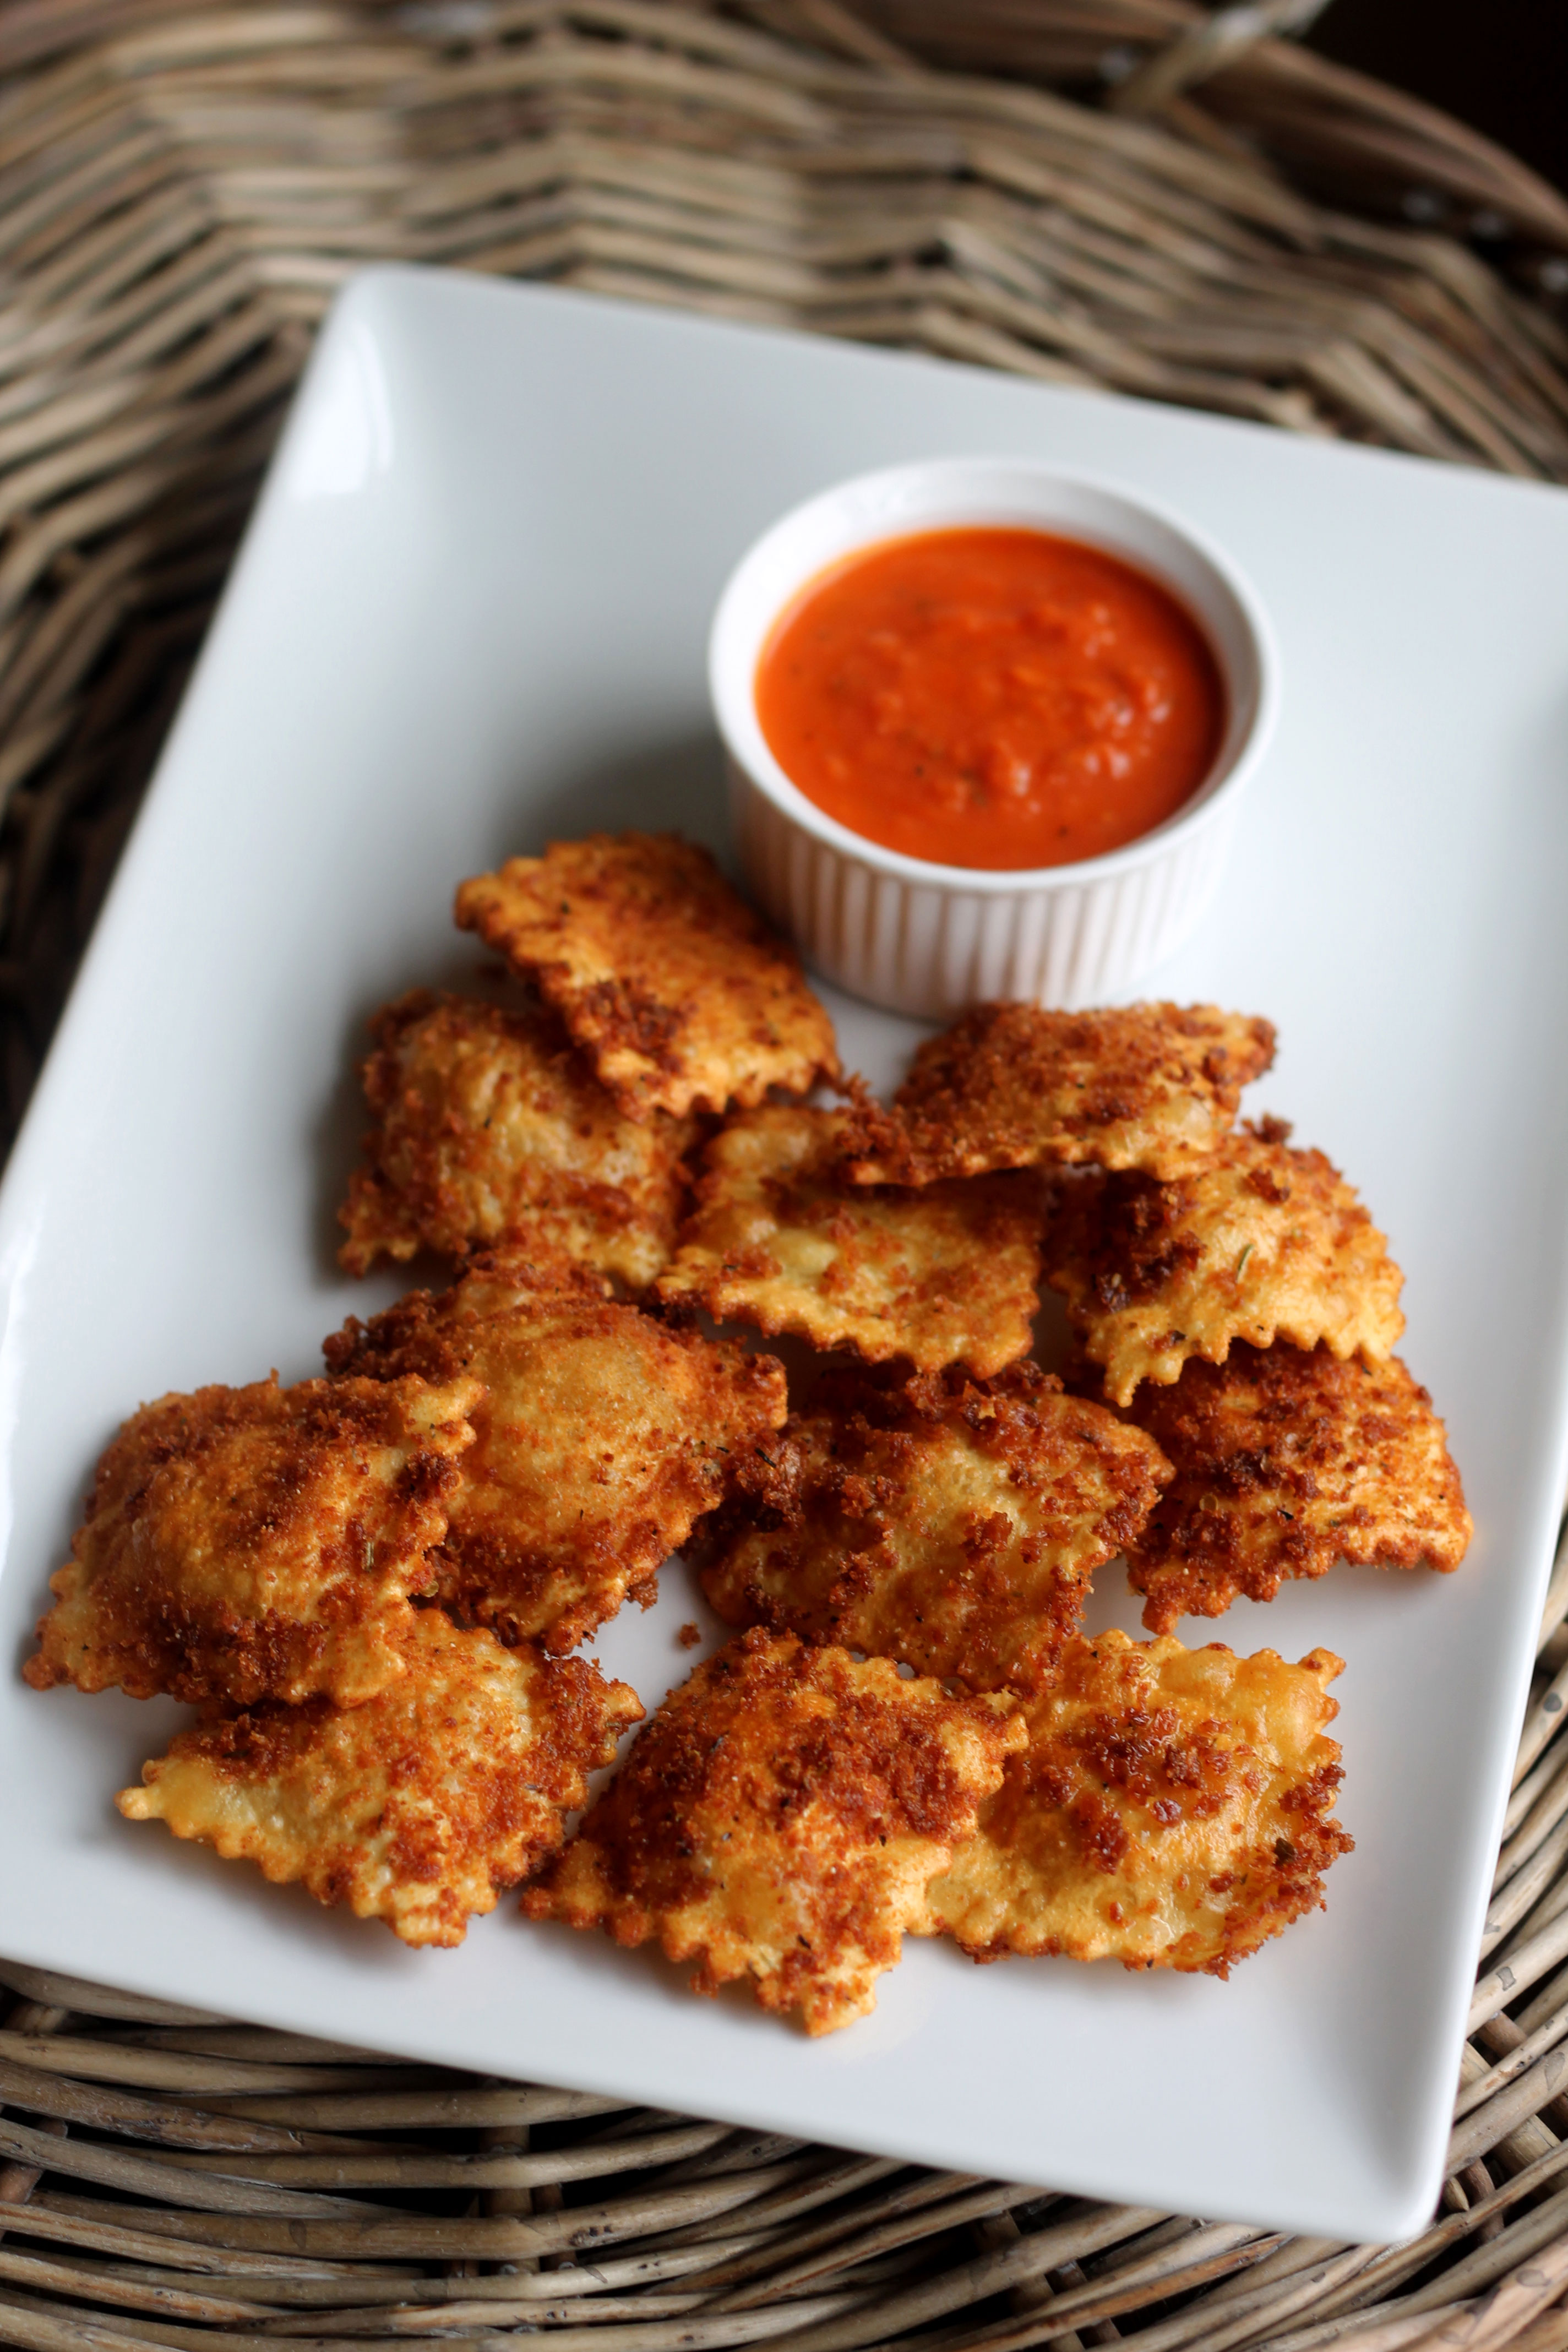 Easy and delicious fried cheese ravioli